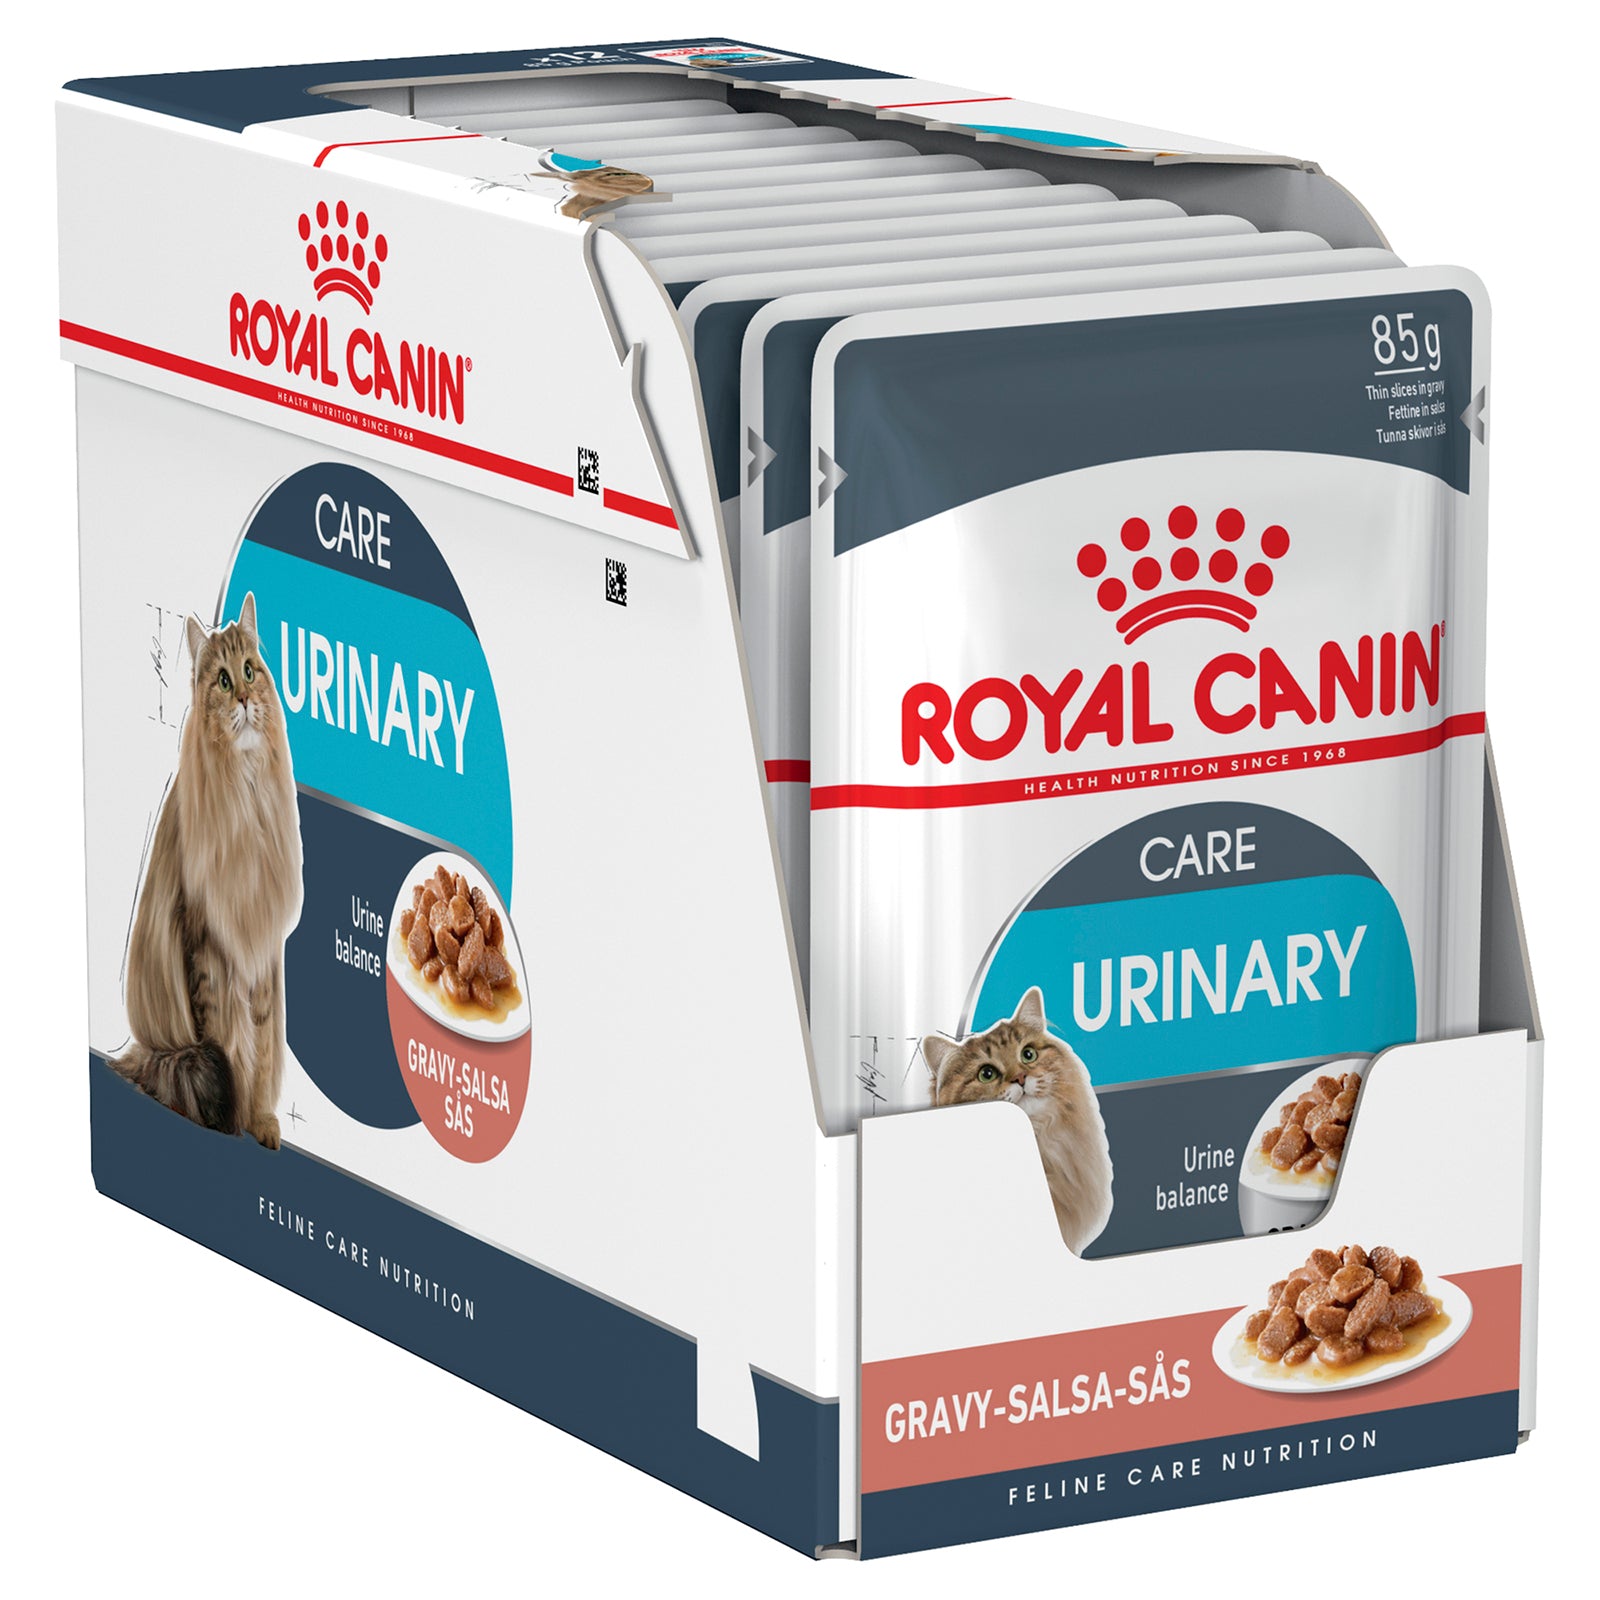 Royal Canin Cat Food Pouch Adult Urinary Care in Gravy